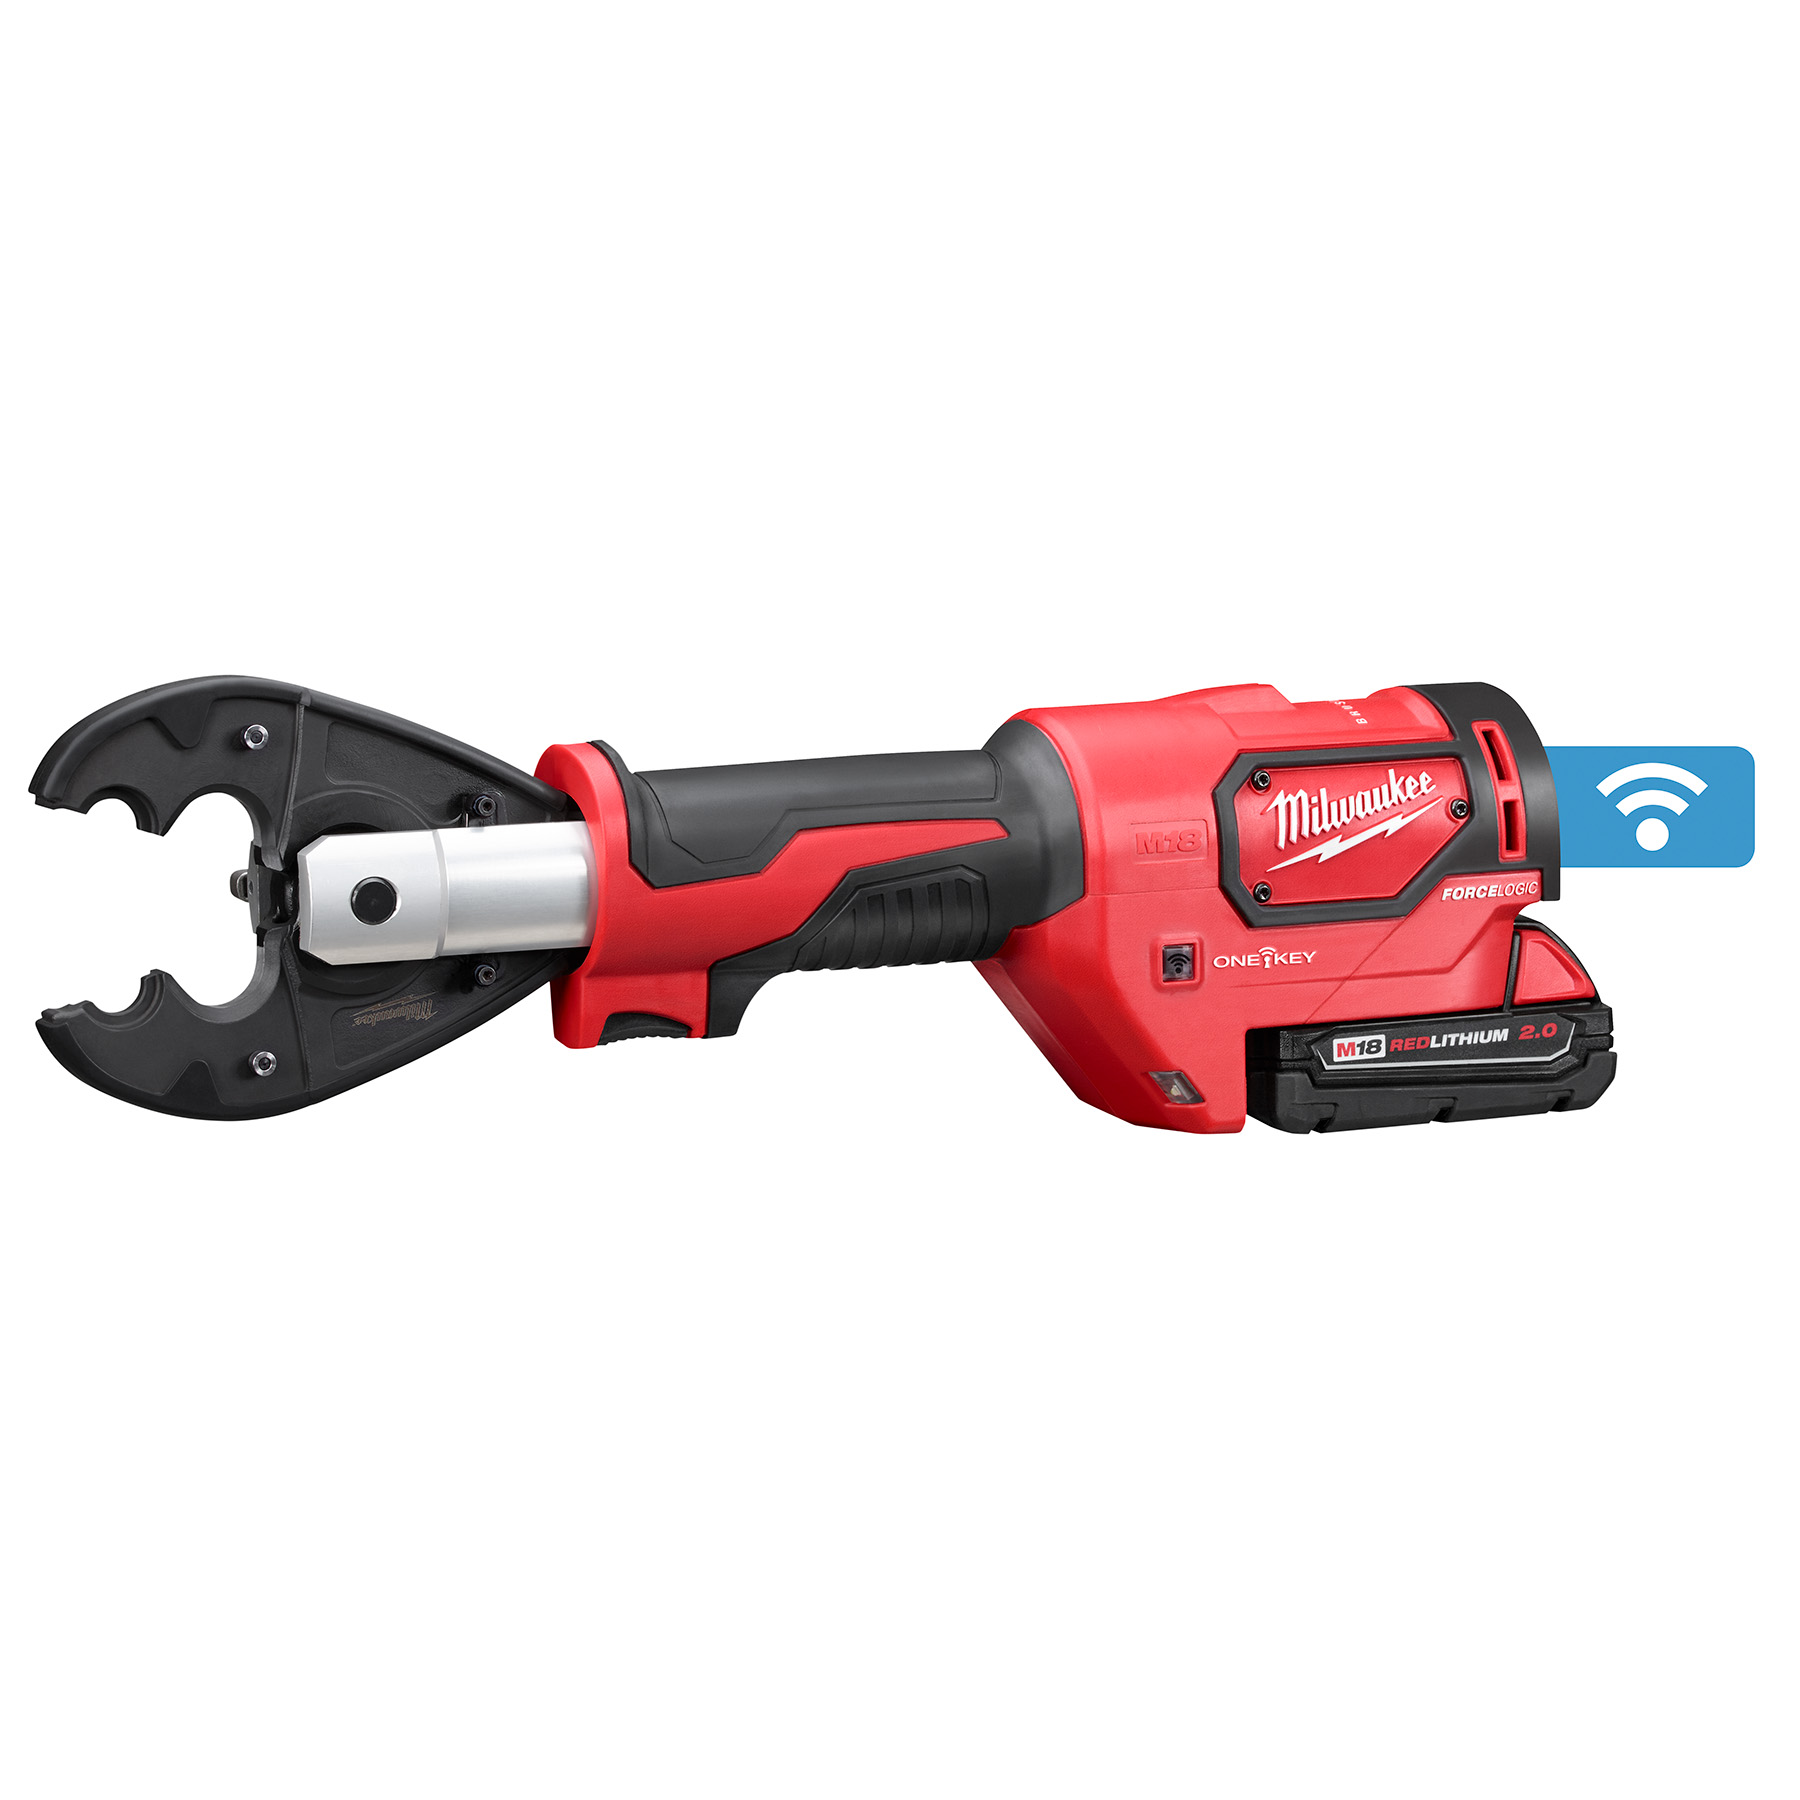 Milwaukee M18 FORCE LOGIC 6T Utility Crimper Kit with D3 Grooves and Fixed BG Die Kit from GME Supply